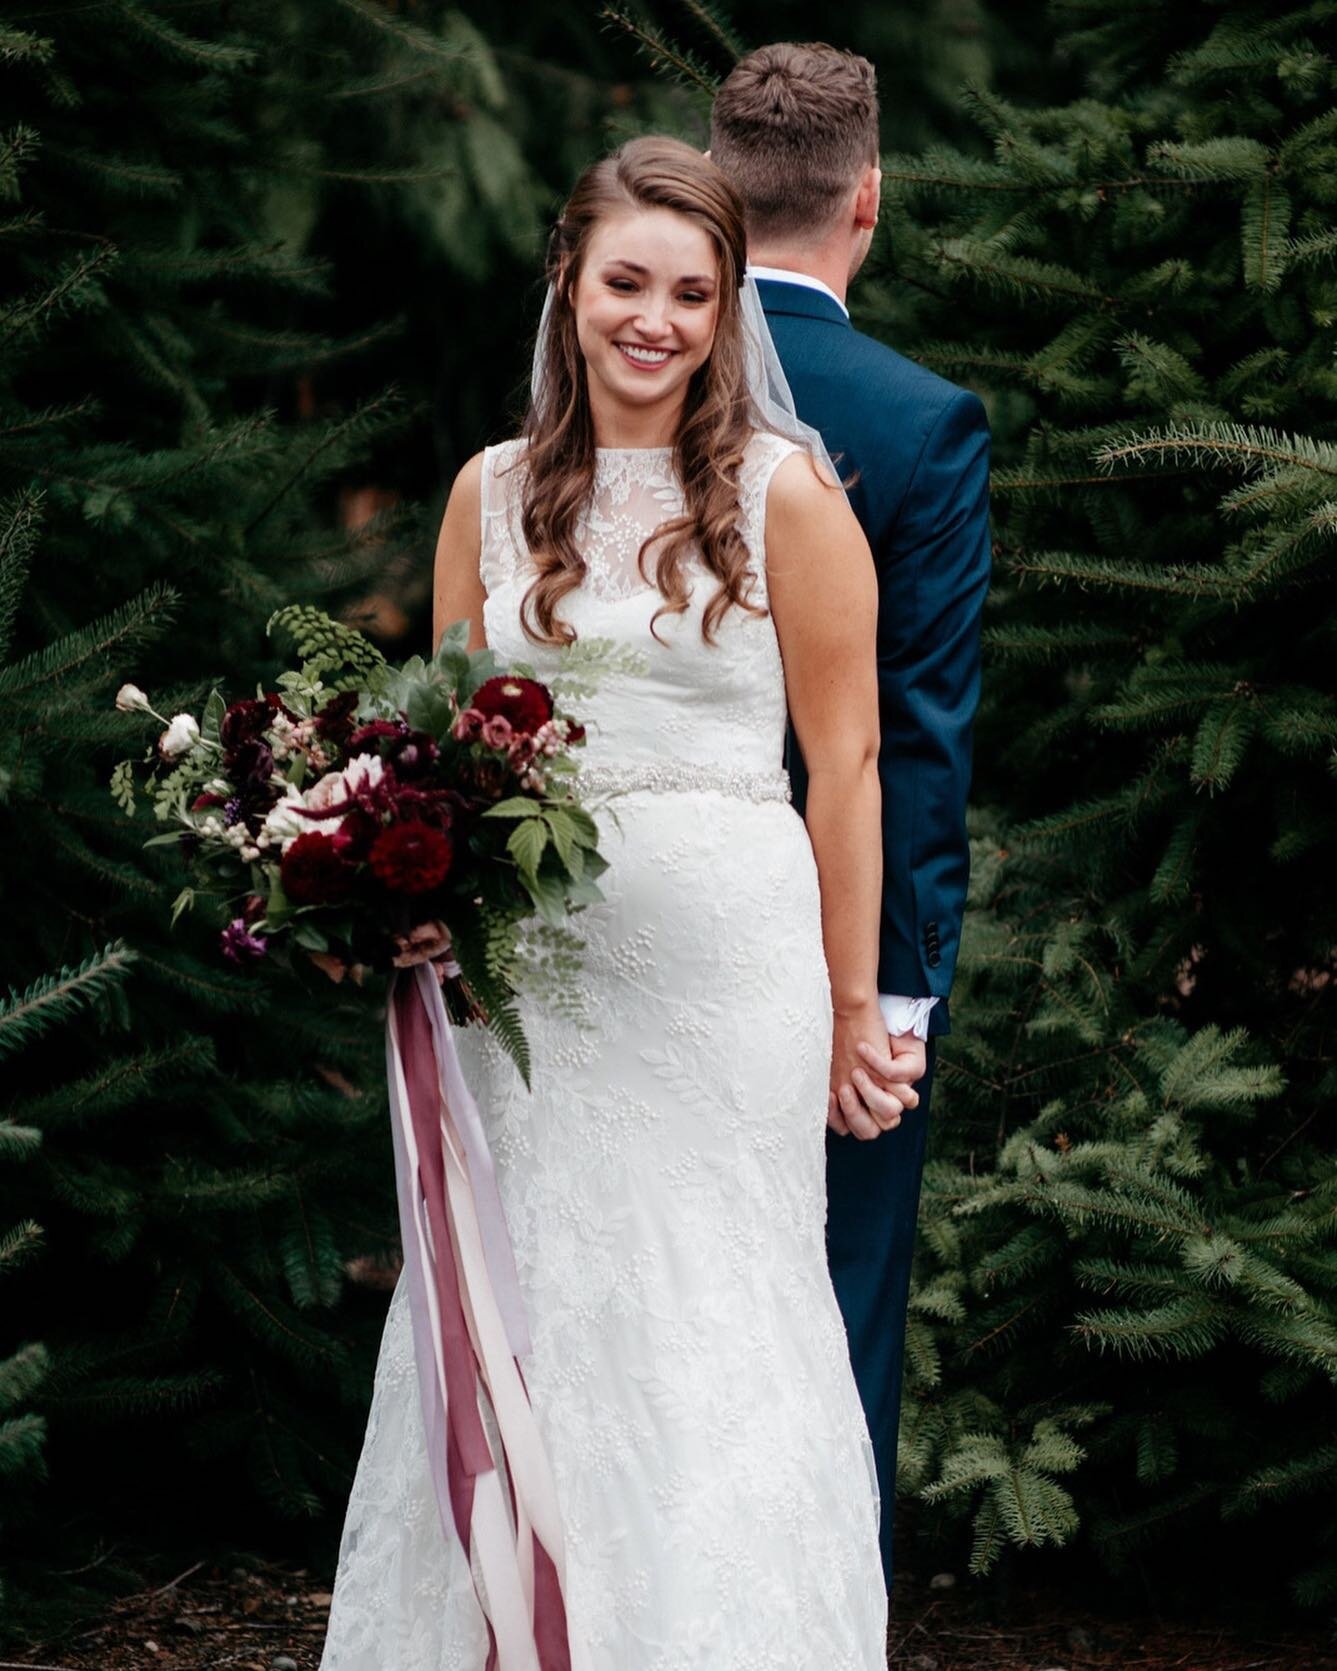 A first look surrounded by Christmas trees. 🎄❤️👰🏽💍
⠀⠀⠀⠀⠀⠀⠀⠀⠀
Photo| @toniechristine
Floral| @gatherdesigncompany
Dress| @annabebridal